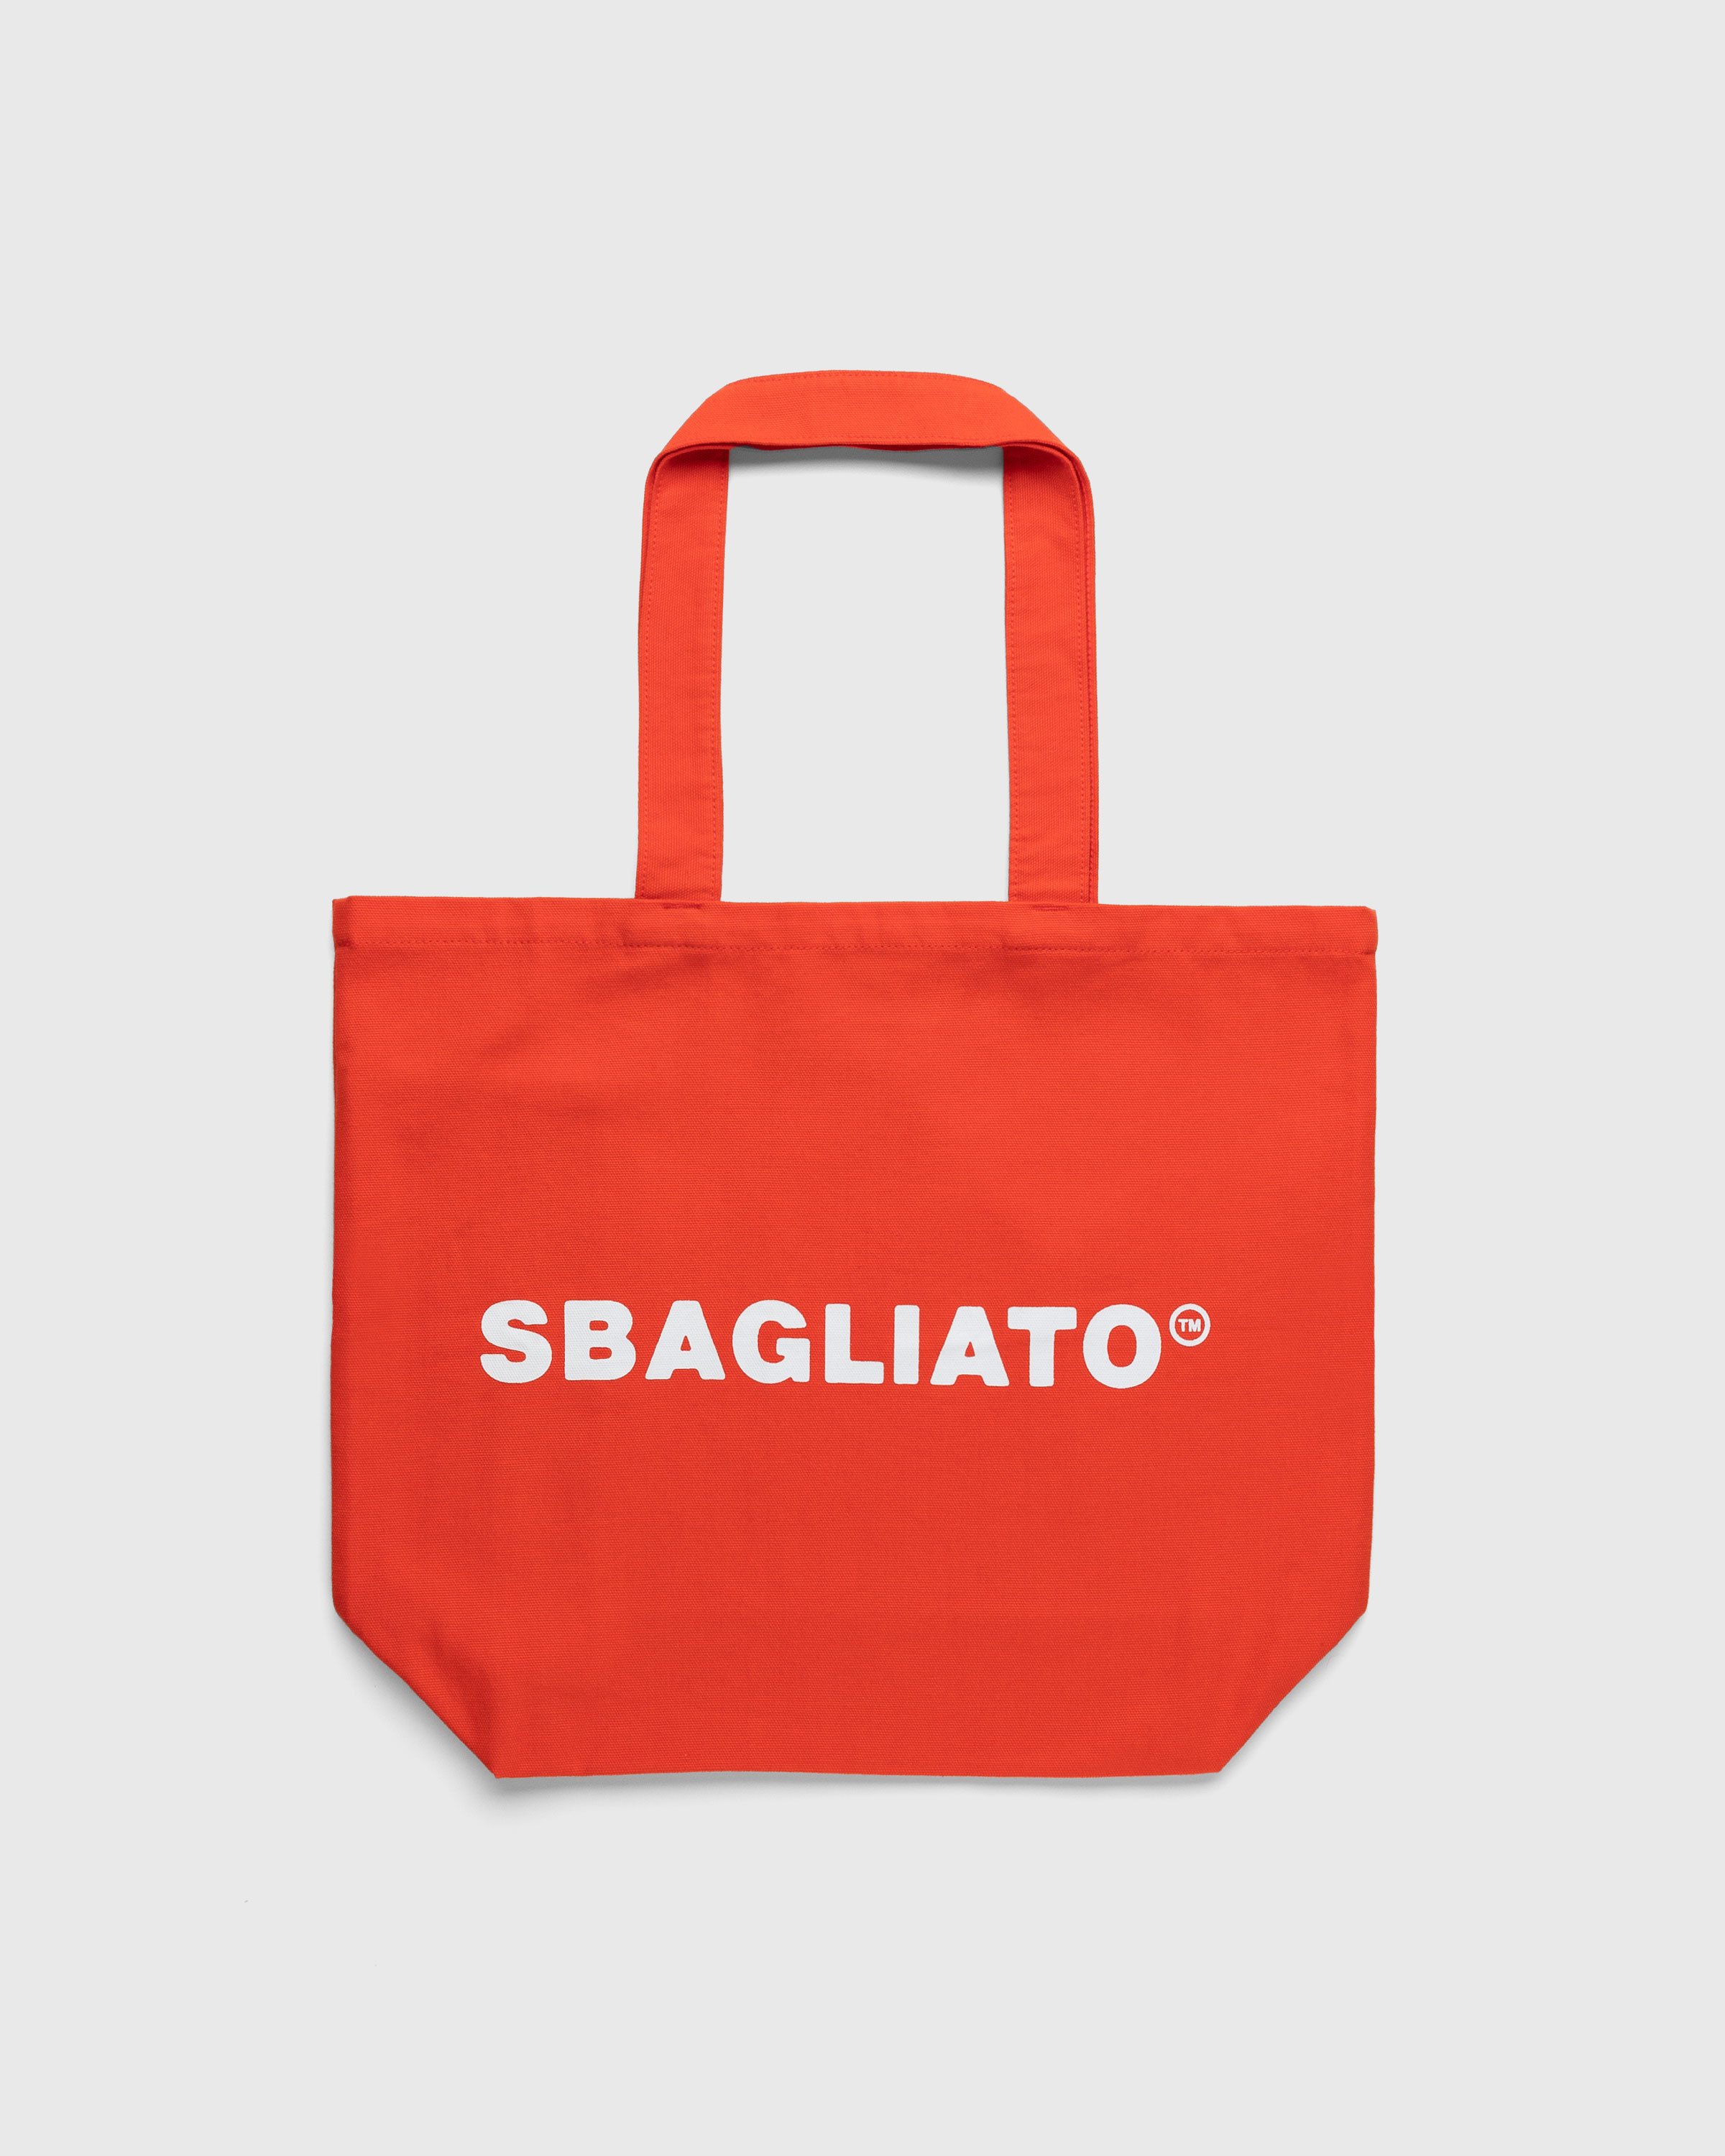 Bar Basso x Highsnobiety - Sbagliato Tote Bag Red - Accessories - Red - Image 1